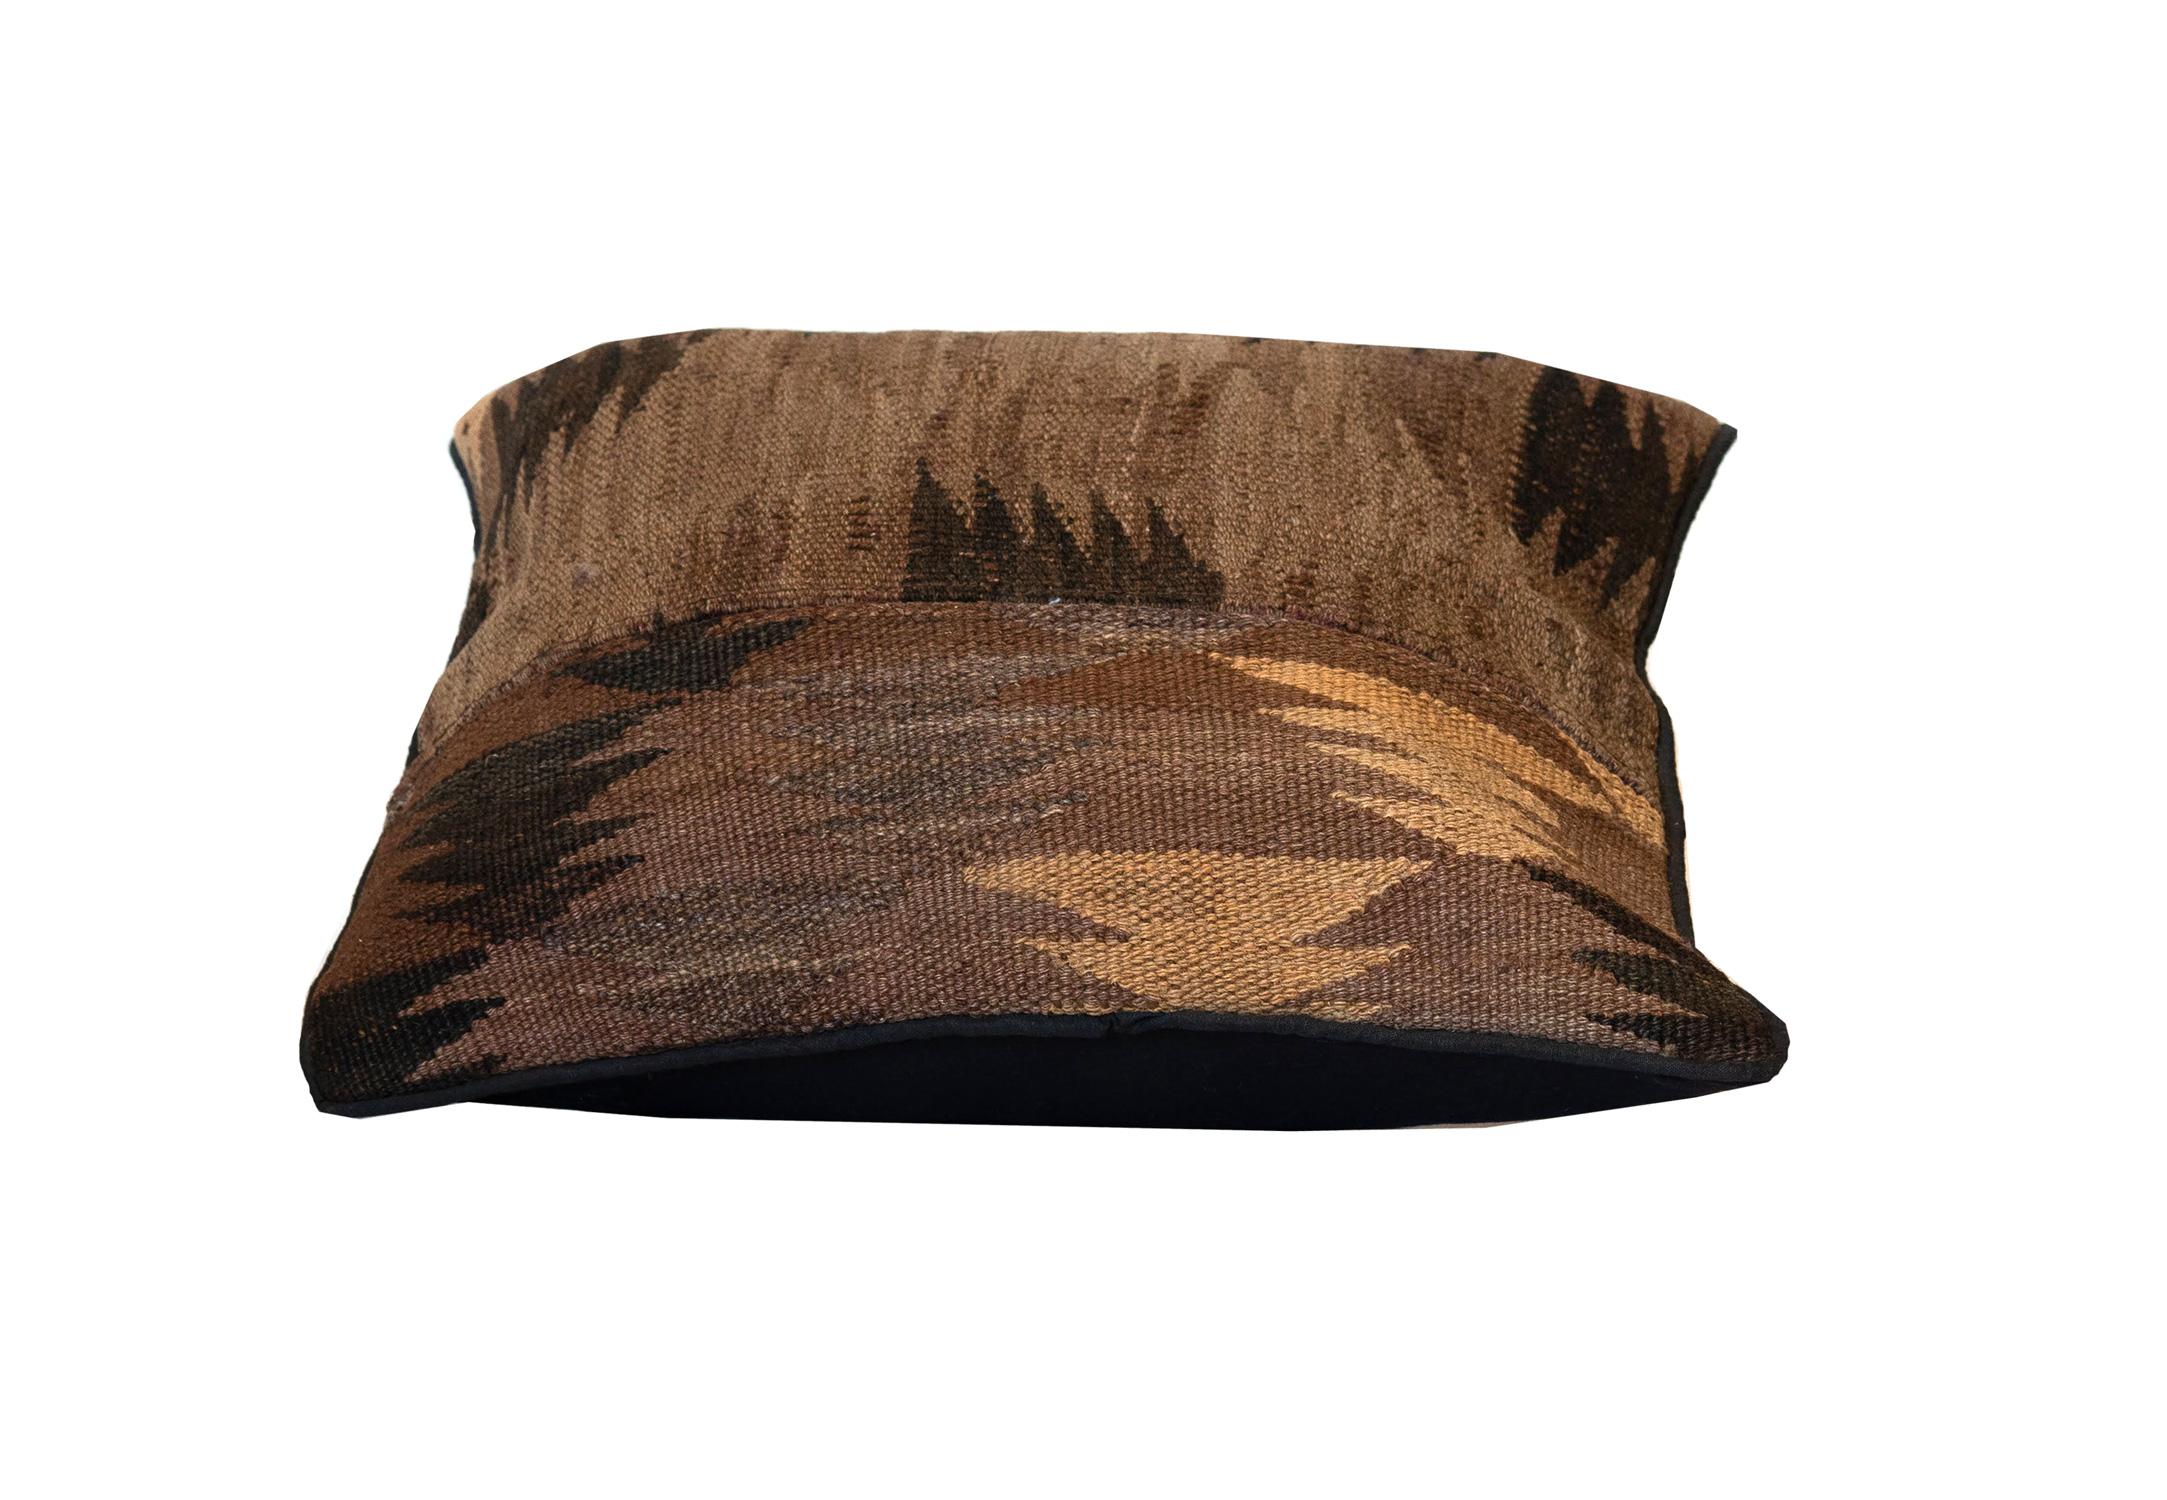 This brown vintage cushion has been woven by hand using traditional Kilim weaving techniques with hand-spun wool. We are featuring an abstract geometric design woven in a brown and cream colour pallet. This piece is sure to make the perfect